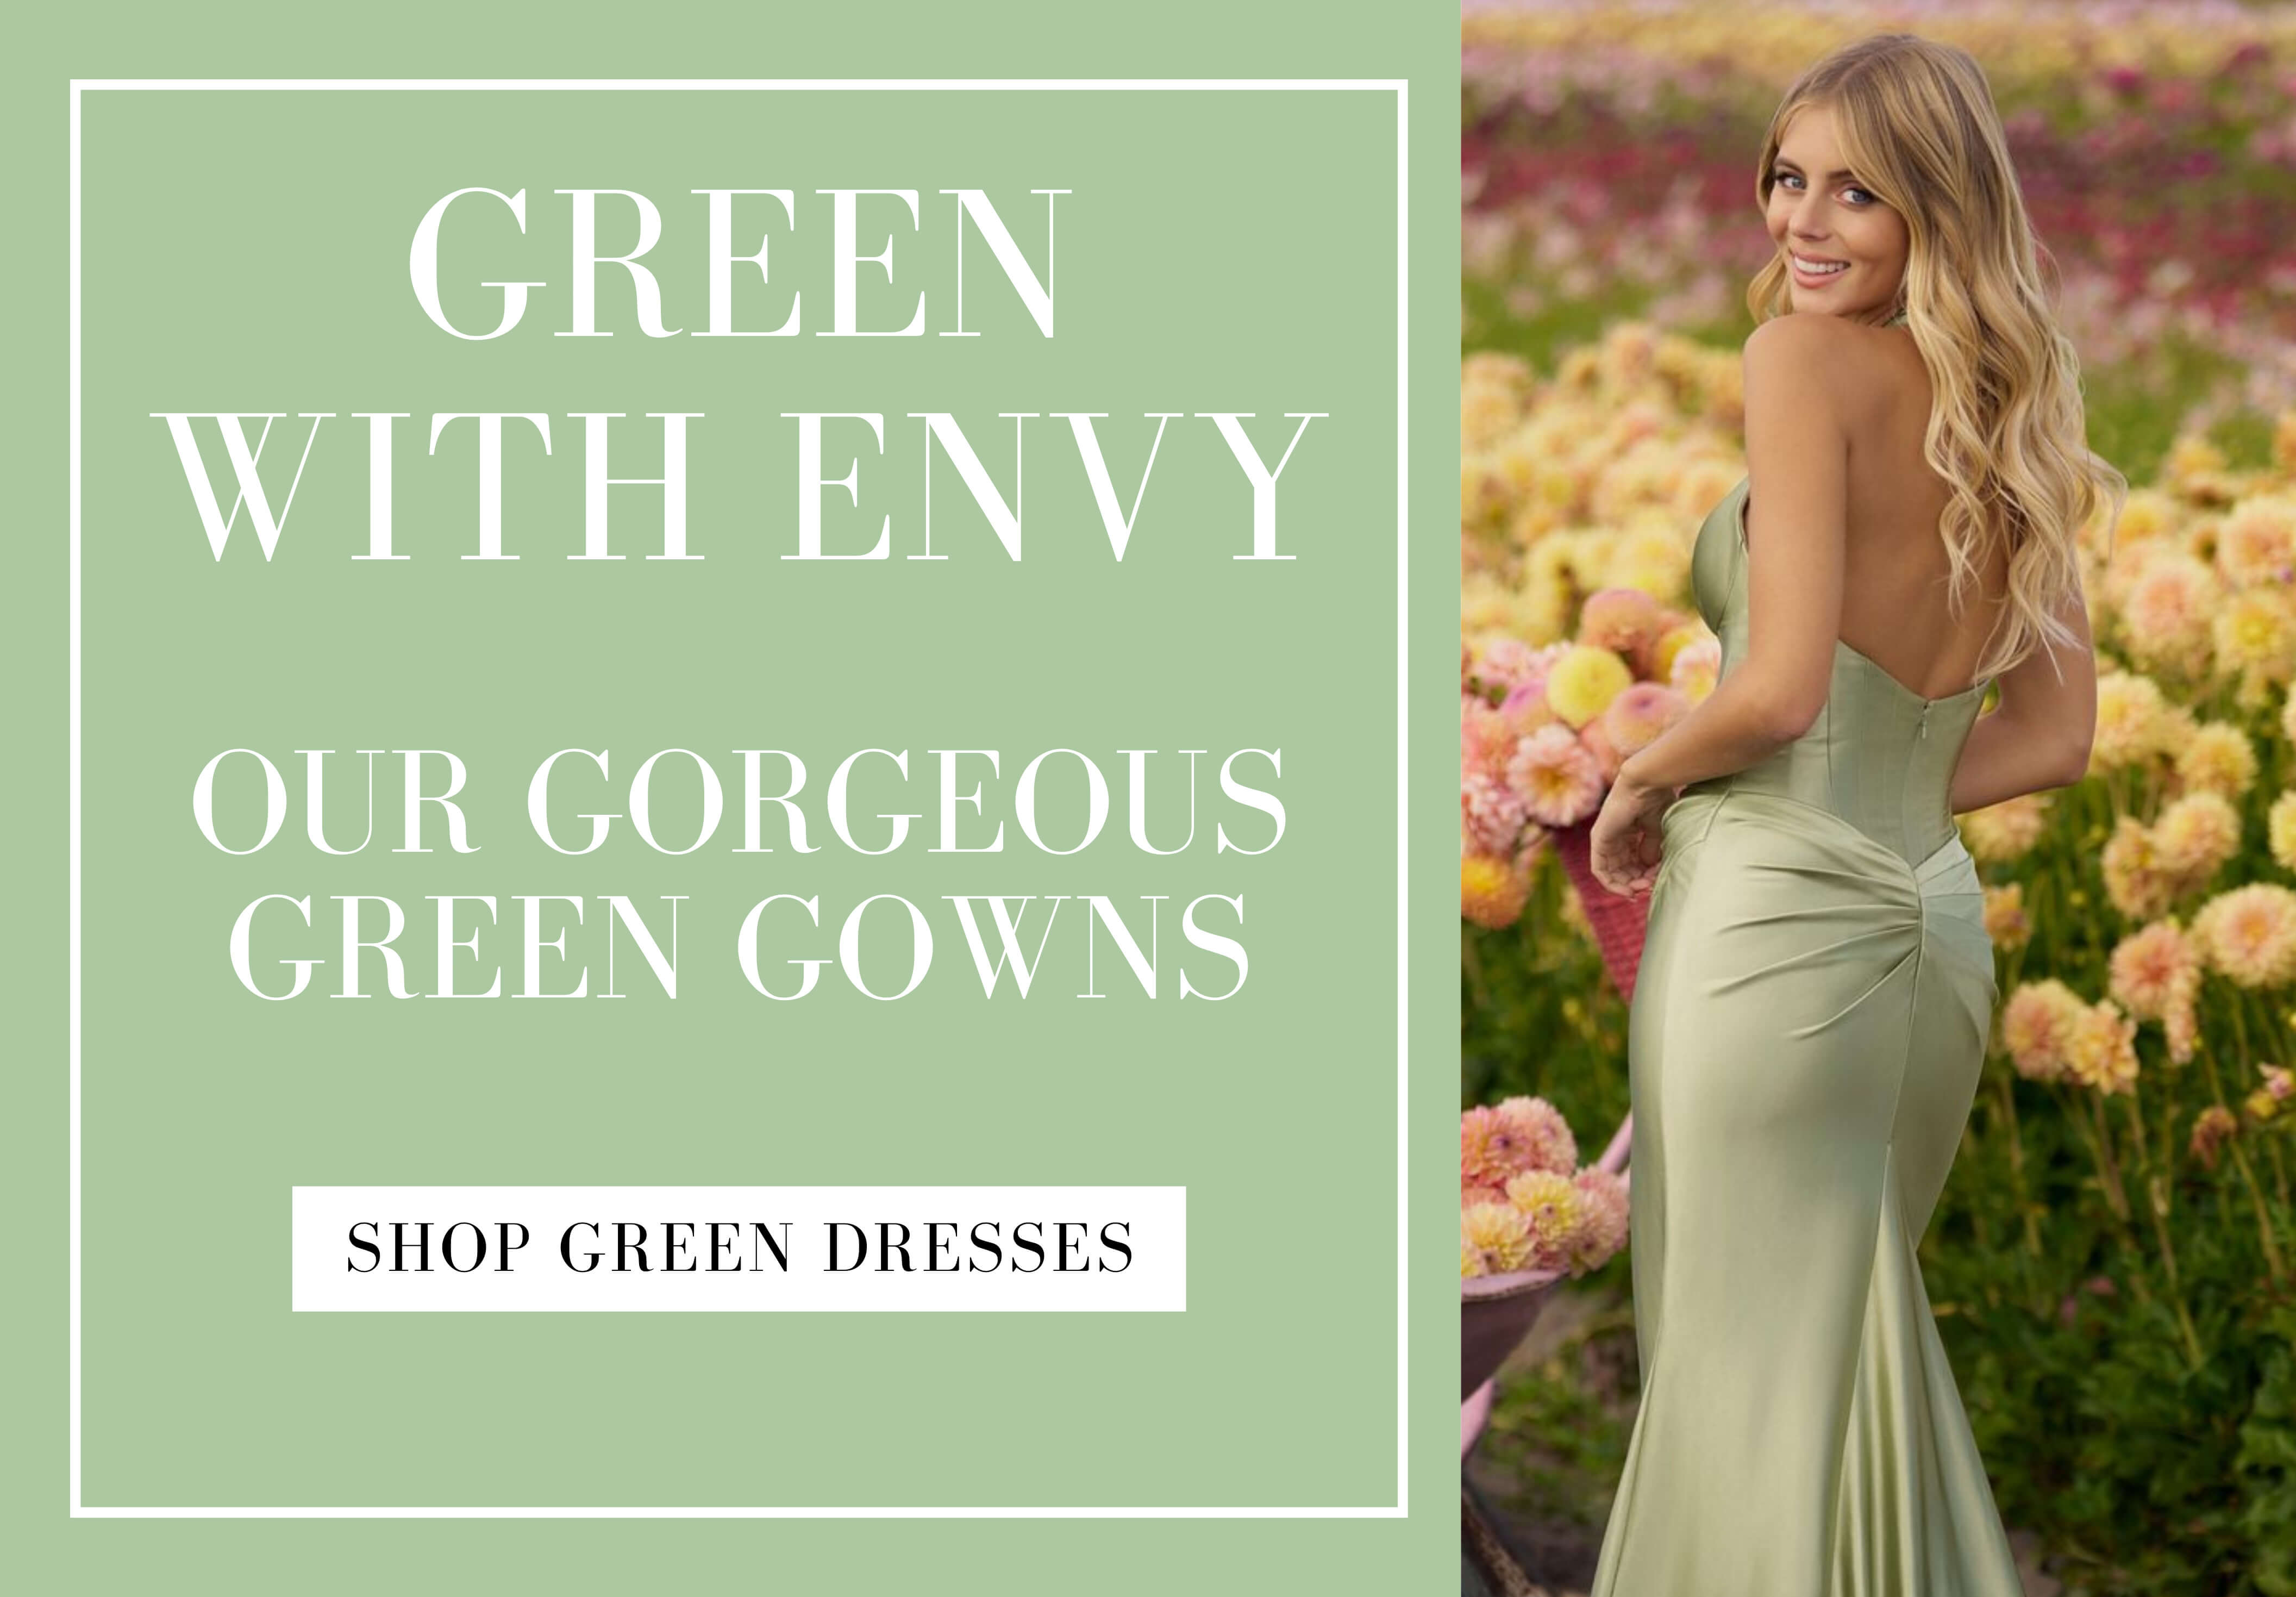 Green with envy dresses. Mobile Image